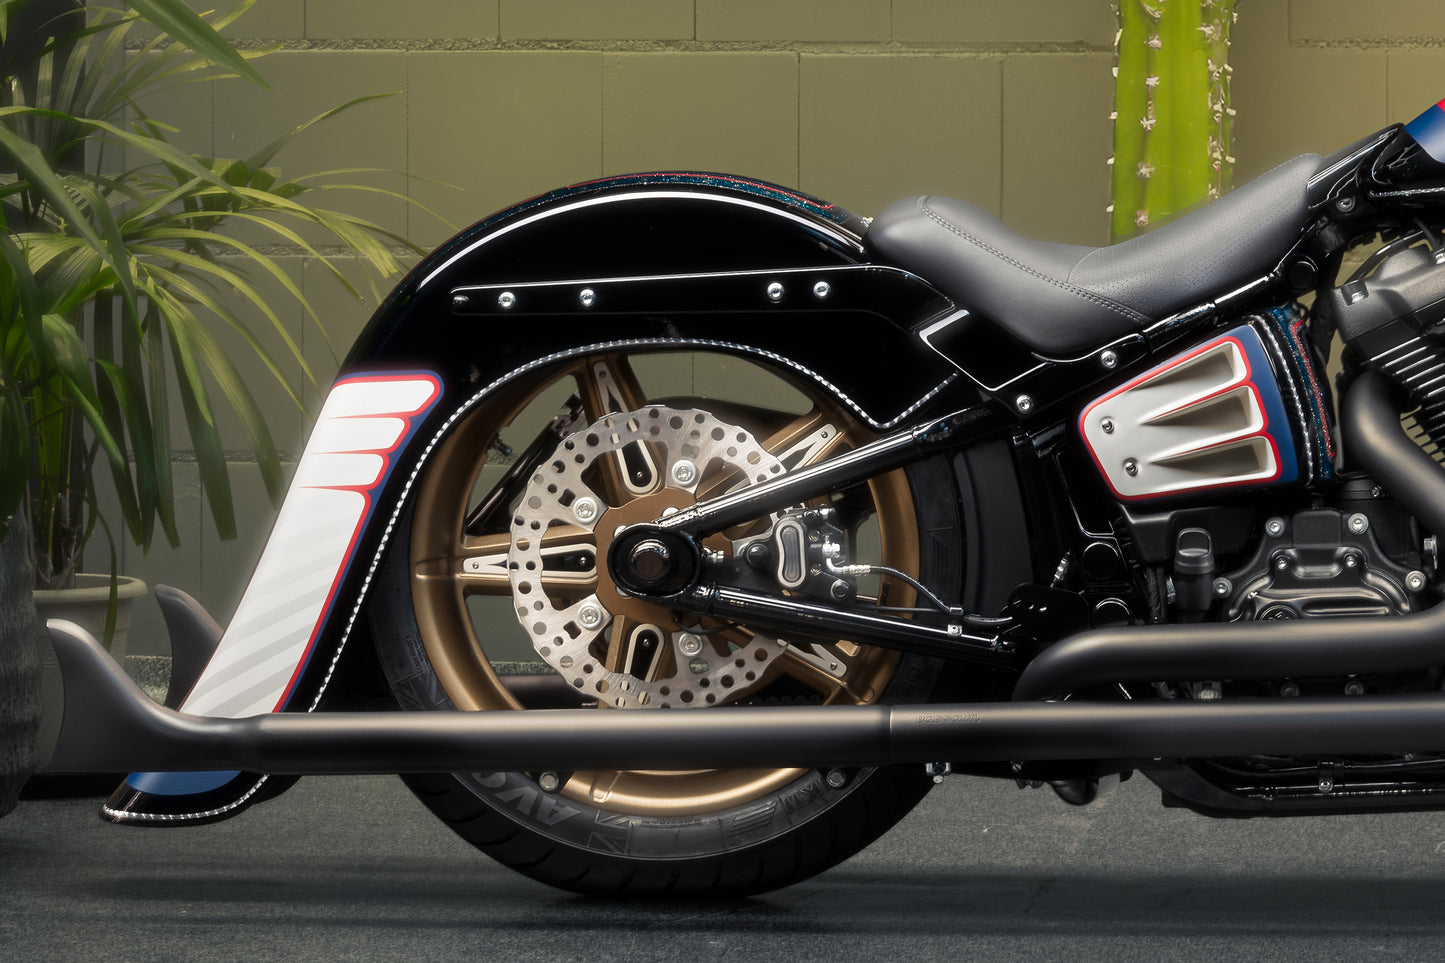 Zoomed Harley Davidson motorcycle with Killer Custom rear fender from the side in an industrial environment